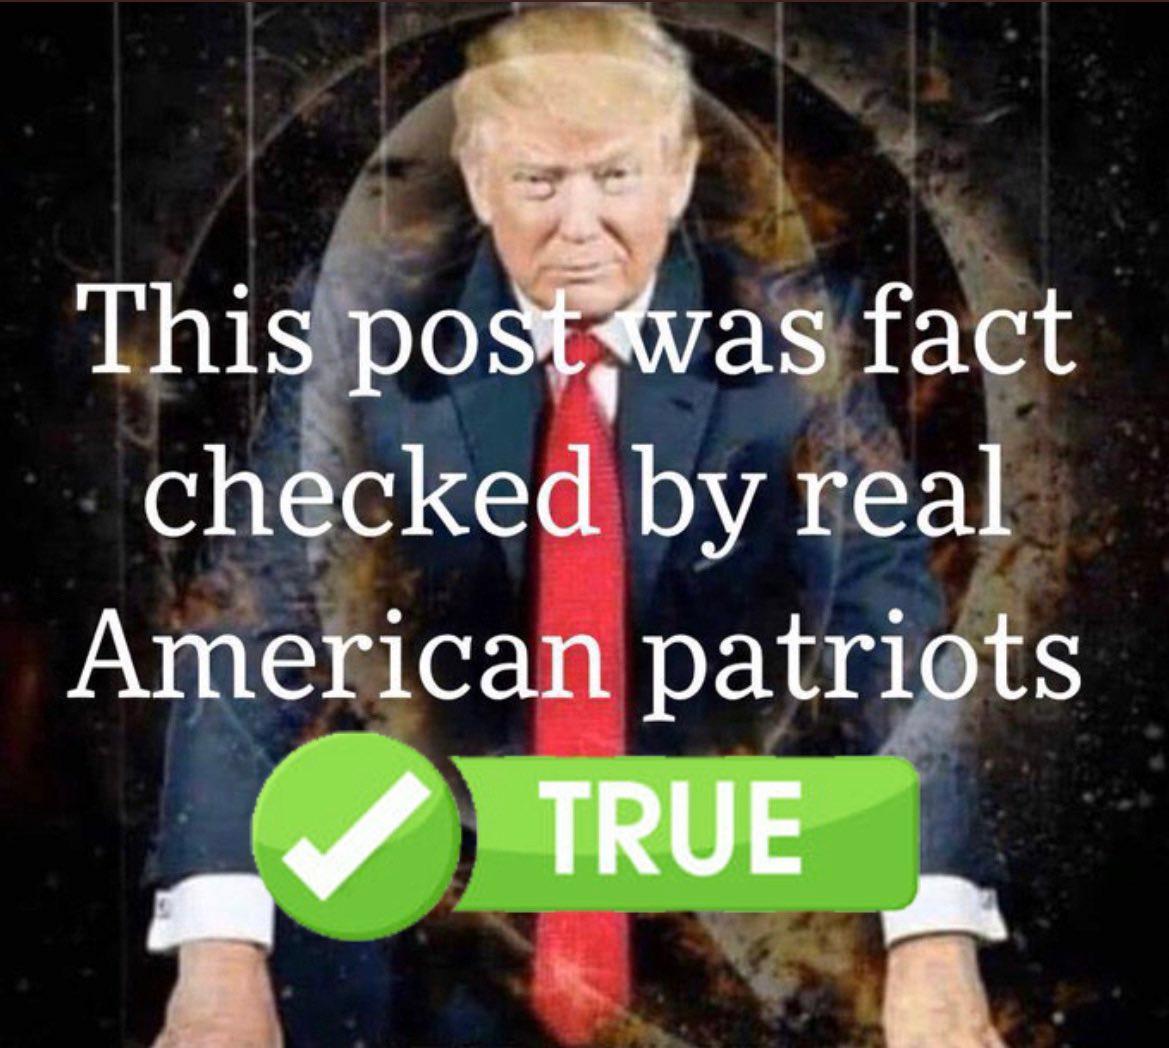 This post was fact checked by real American patriots